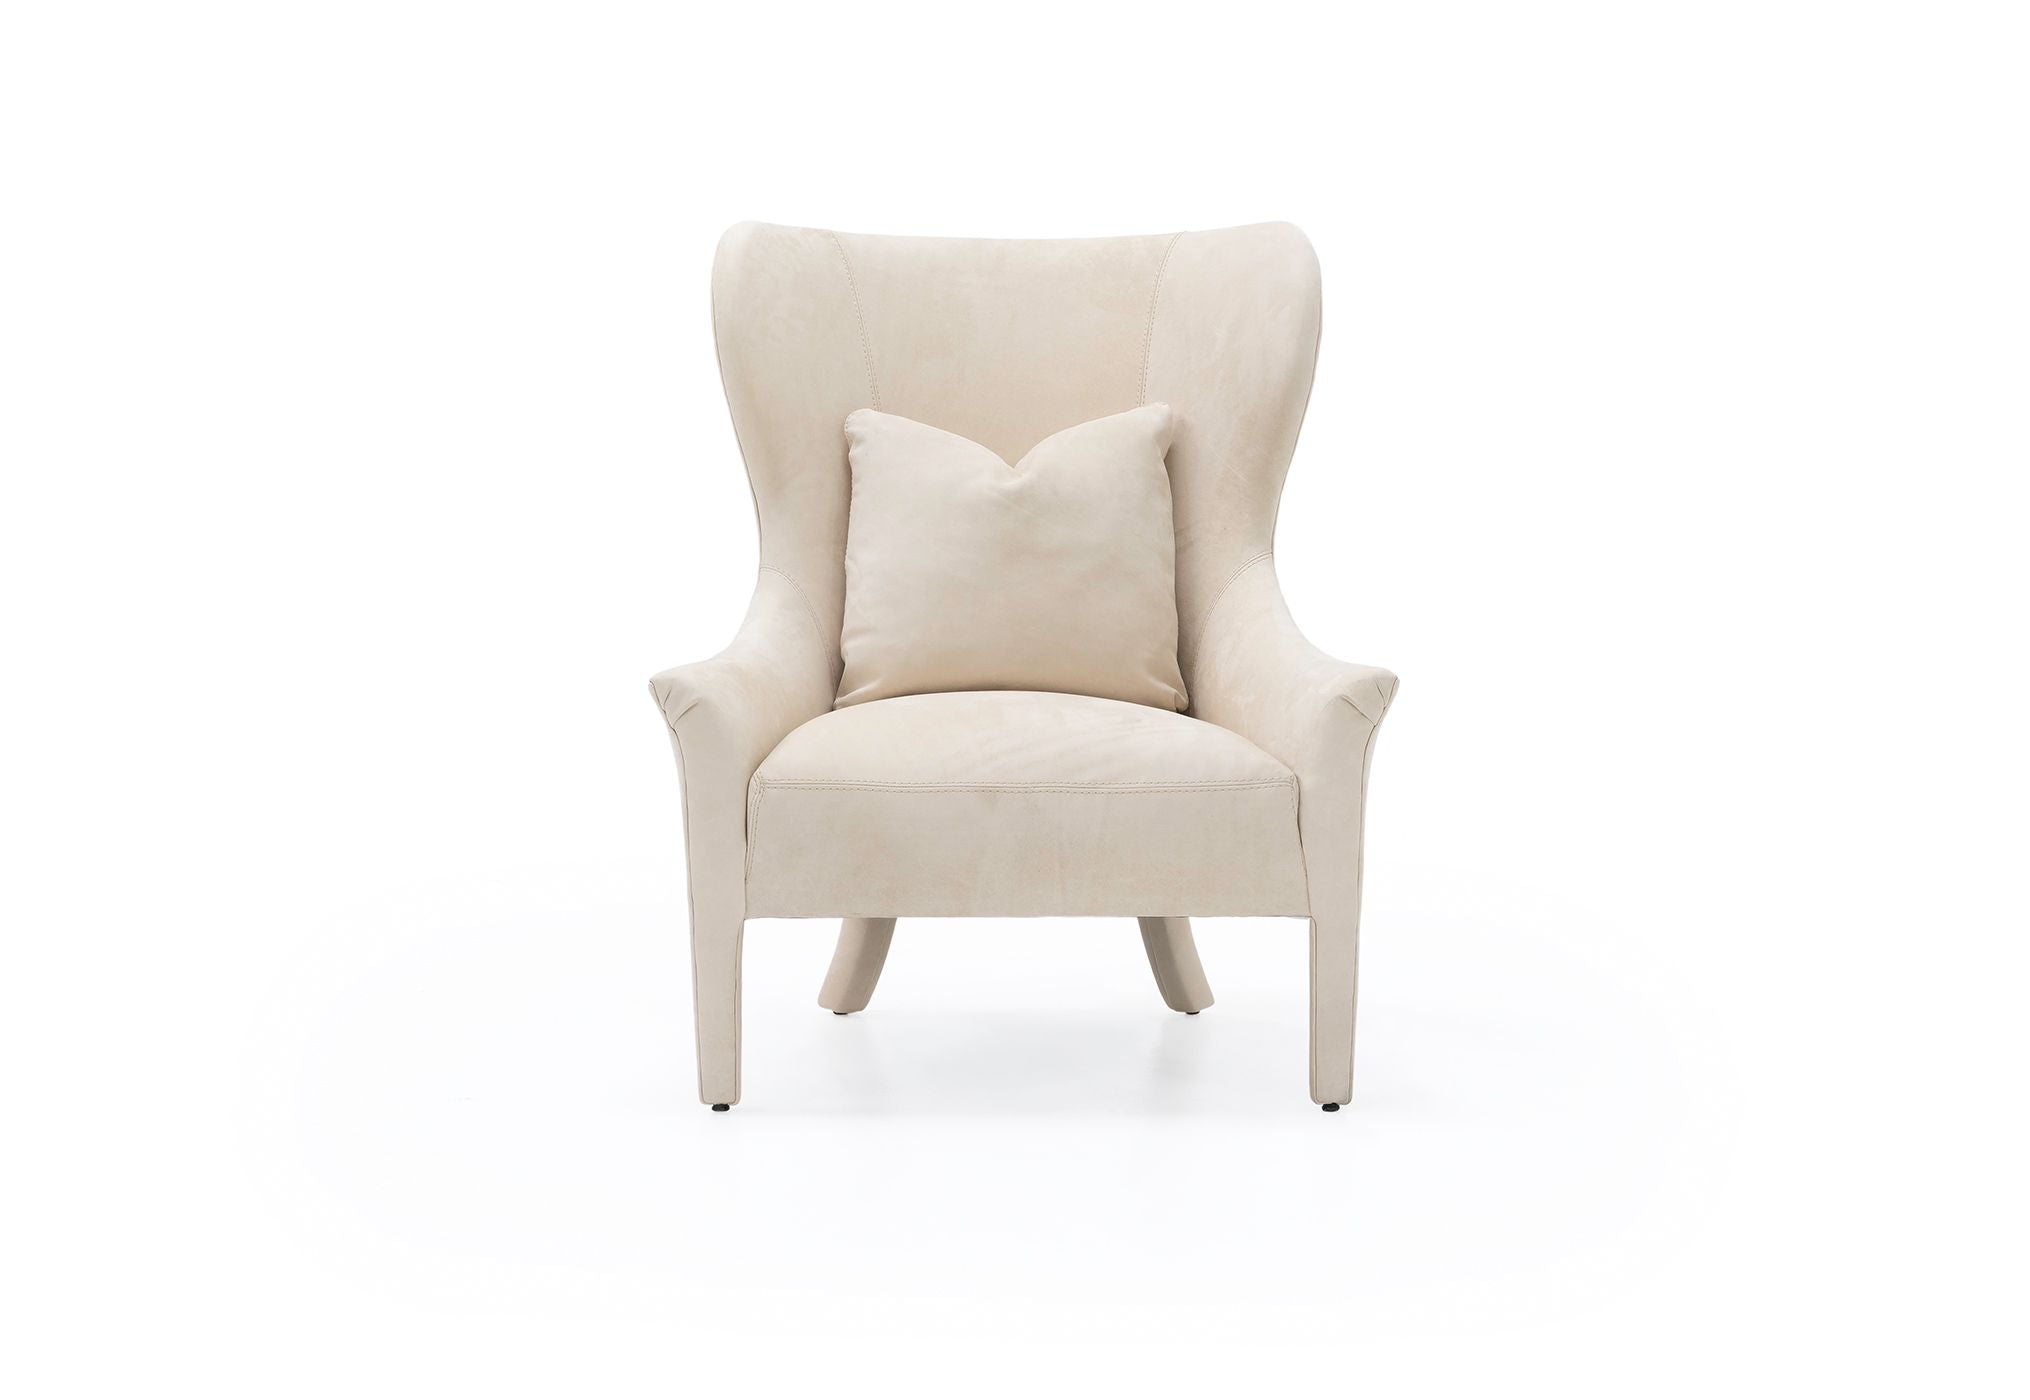 AVA WING CHAIR